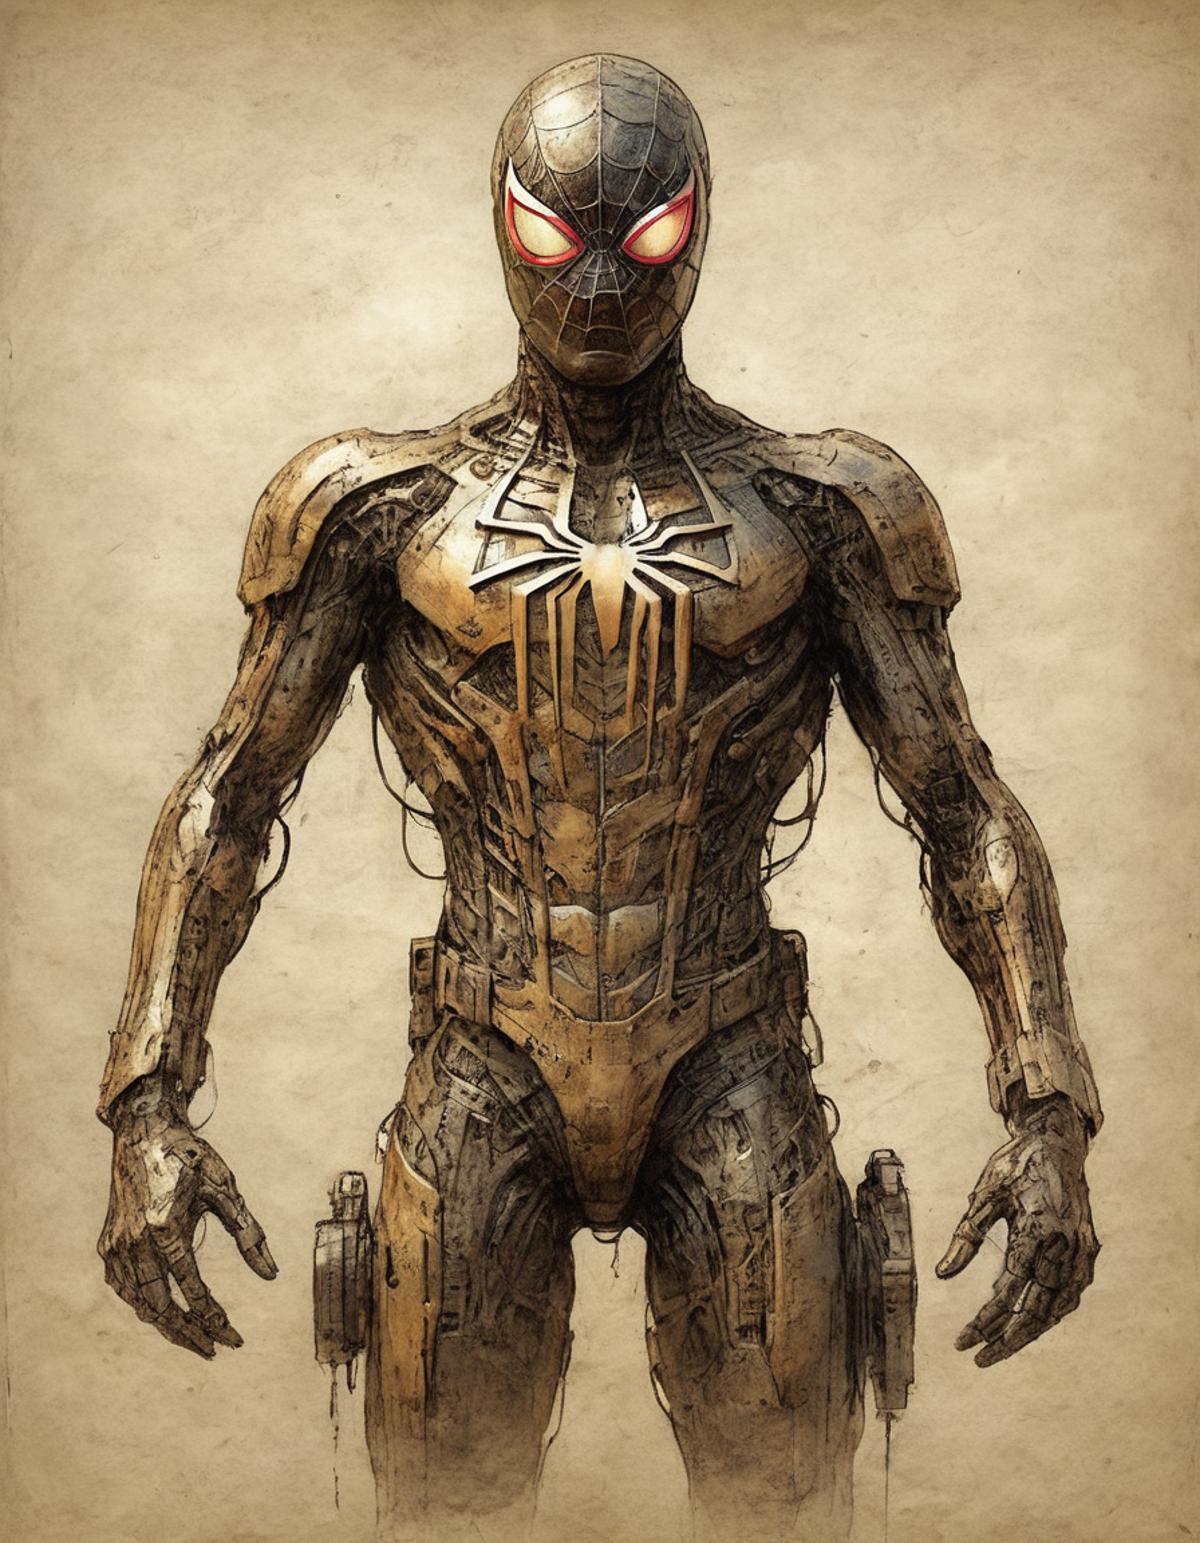 A Spider-Man robot with a gun on his side, drawn in a mechanical style, standing against a brown background.